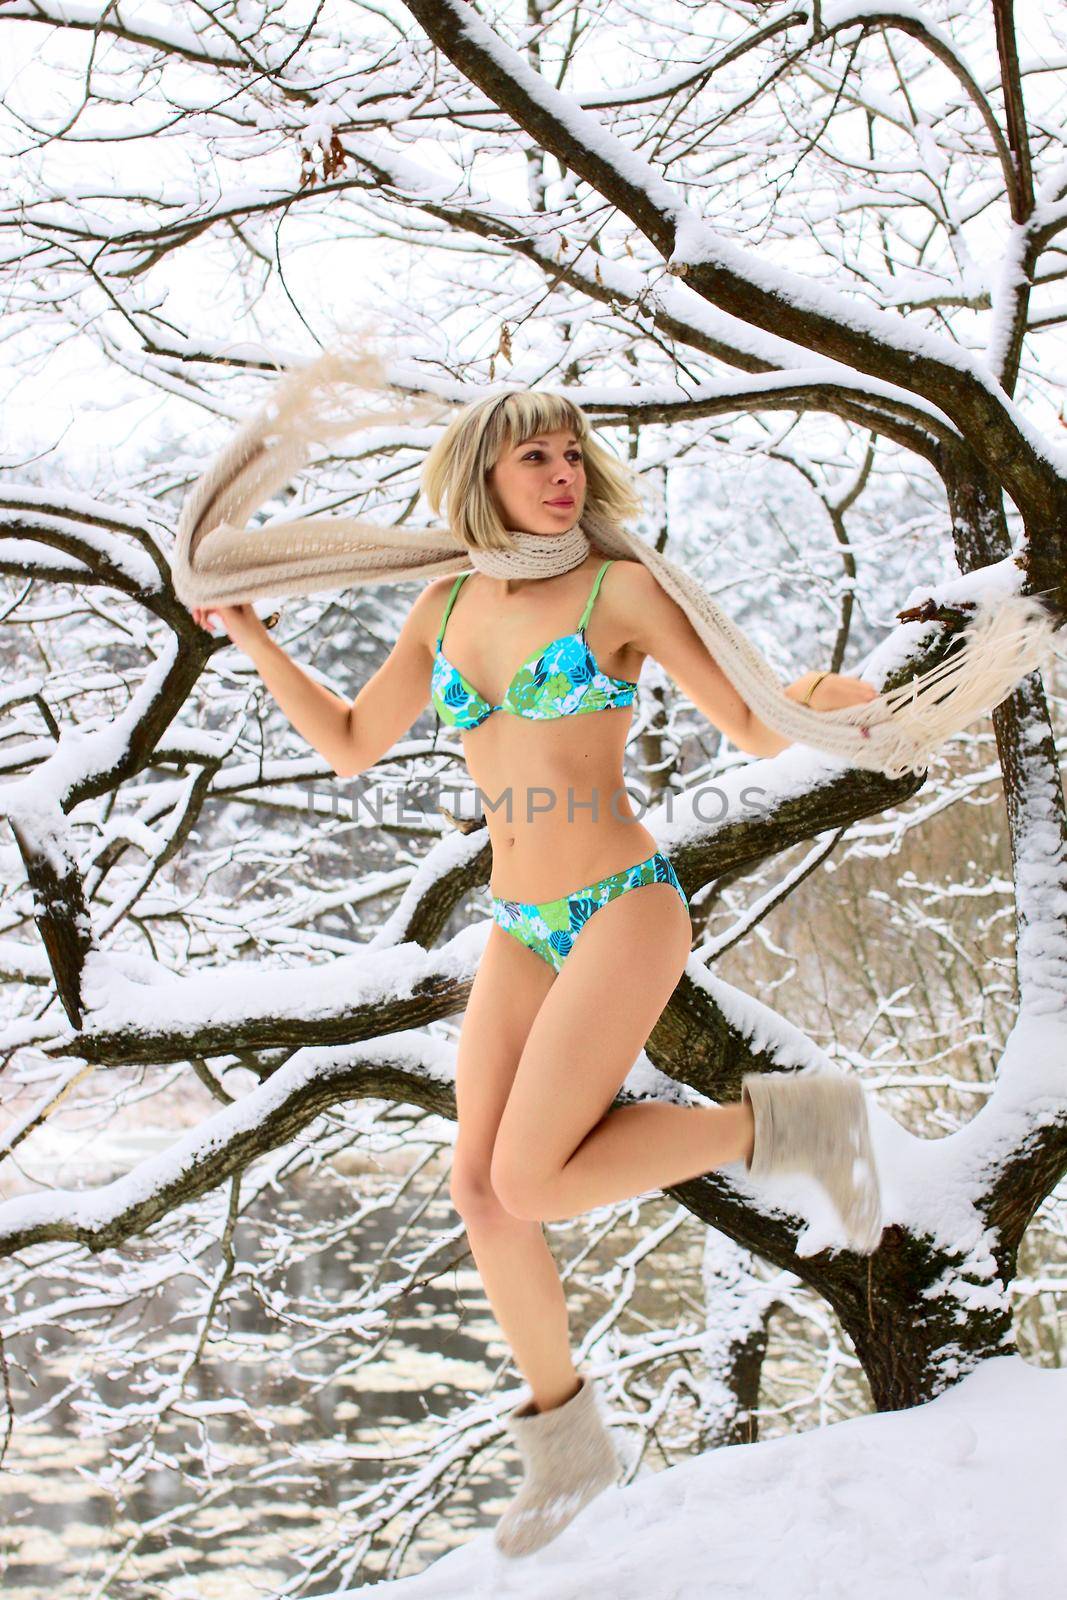 Blonde woman jumping on the snow in winter forest